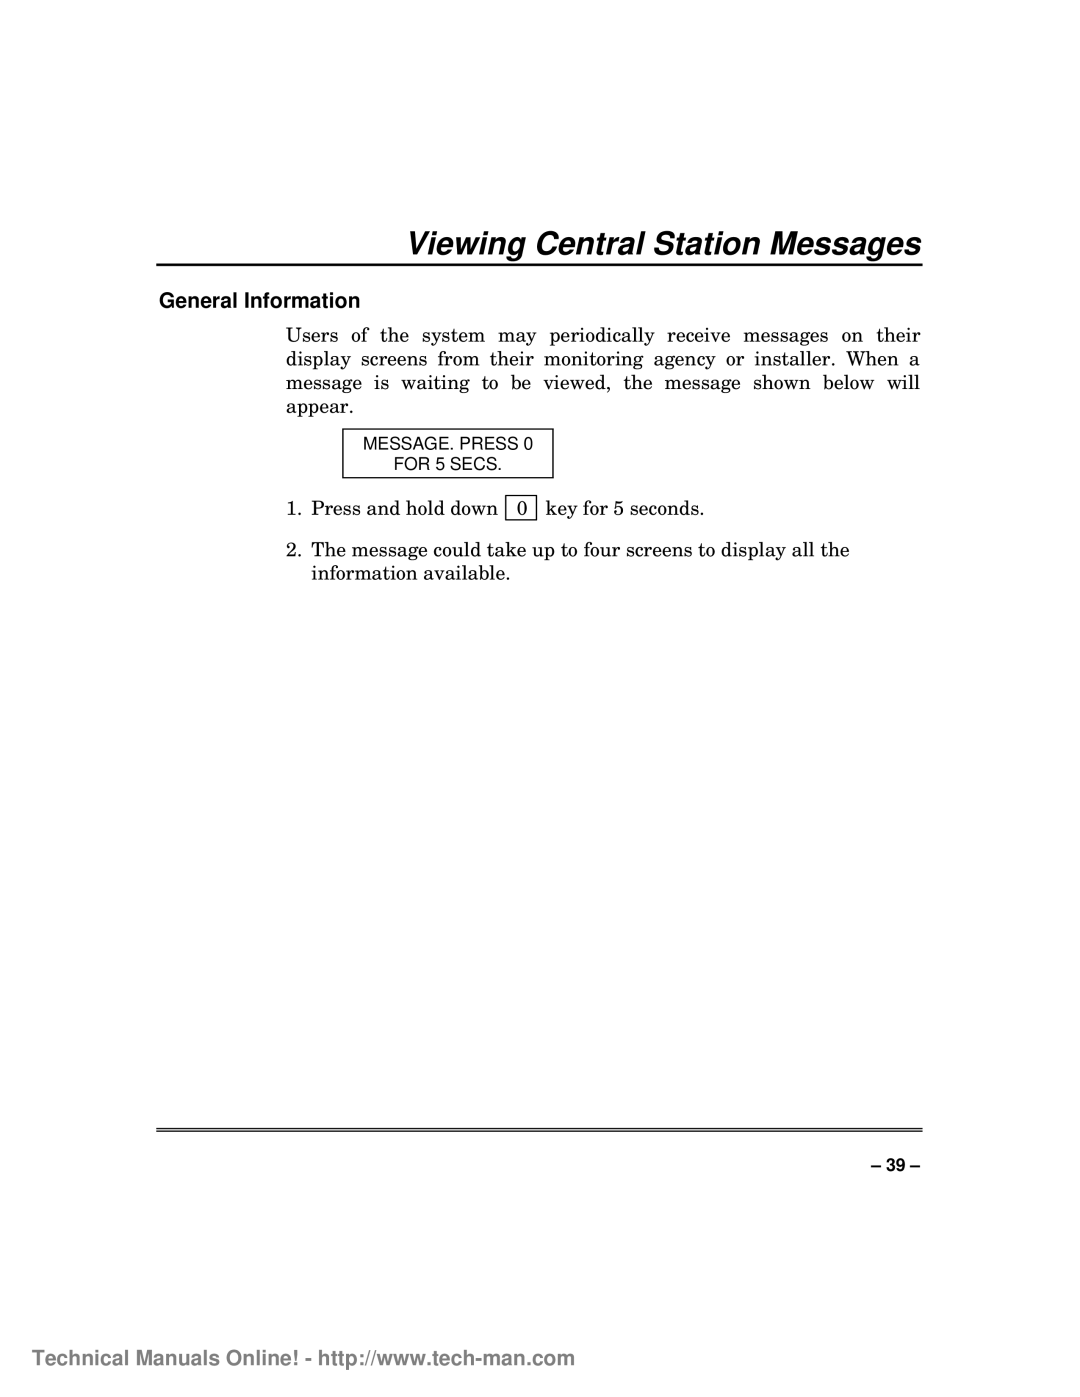 First Alert FA1600C/CA/CB, fa1600c technical manual Viewing Central Station Messages, General Information 